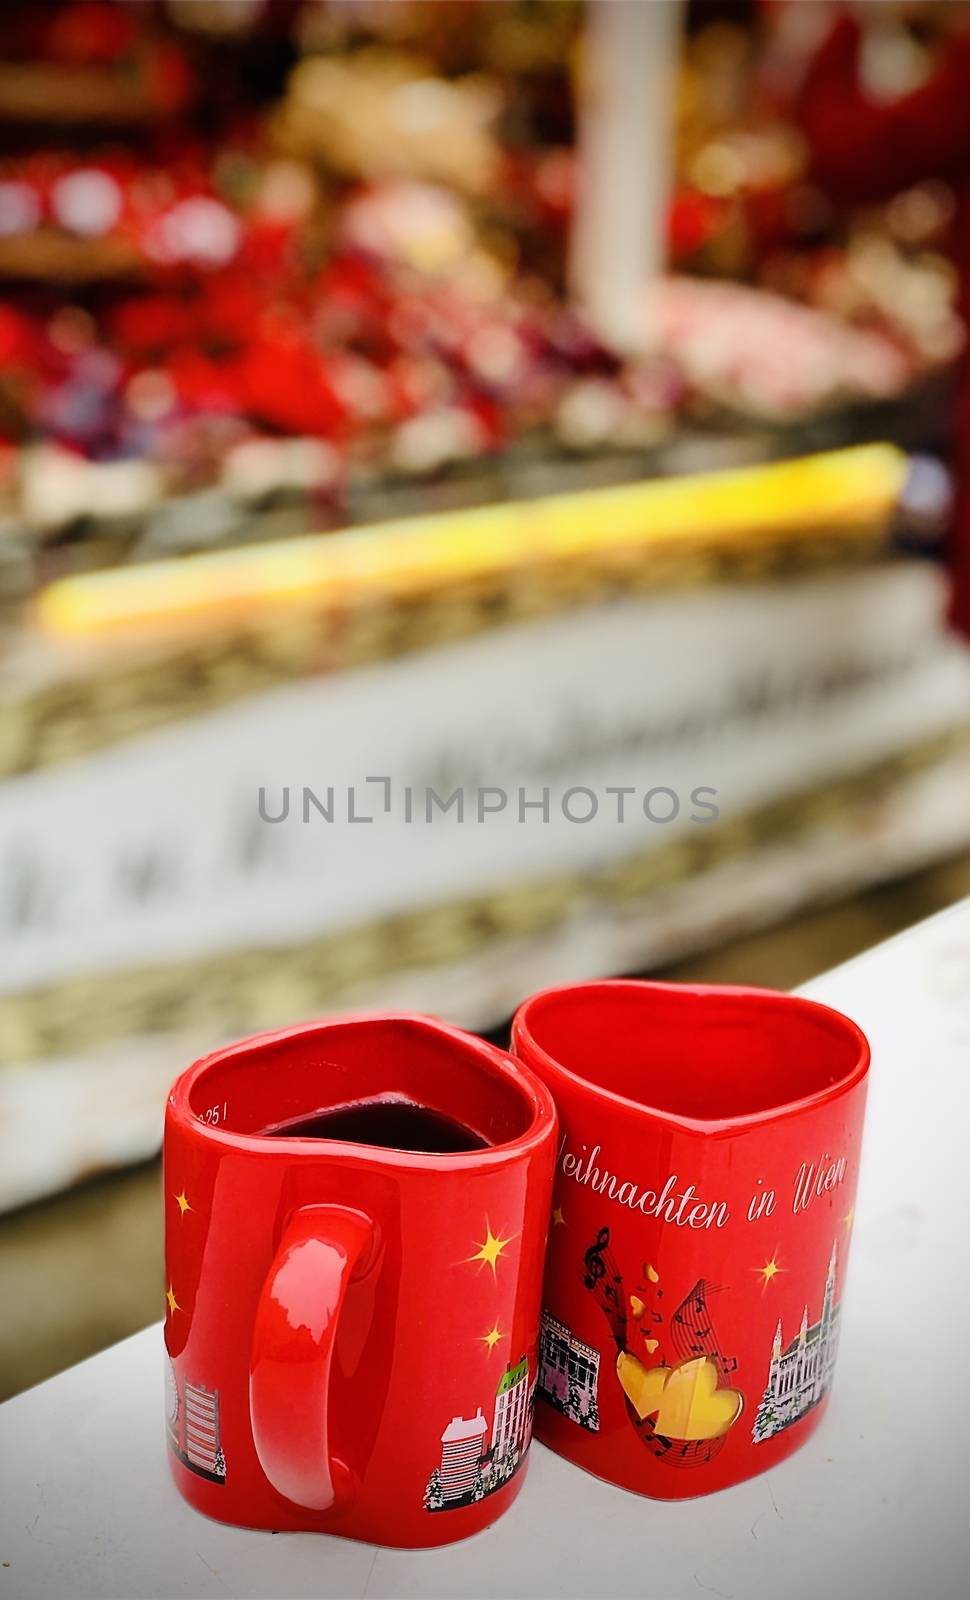 Hot gluwein in red heart shped mugs in Vienna, Austria. Shot taken at  16 December 2019 at the Christmass markets 